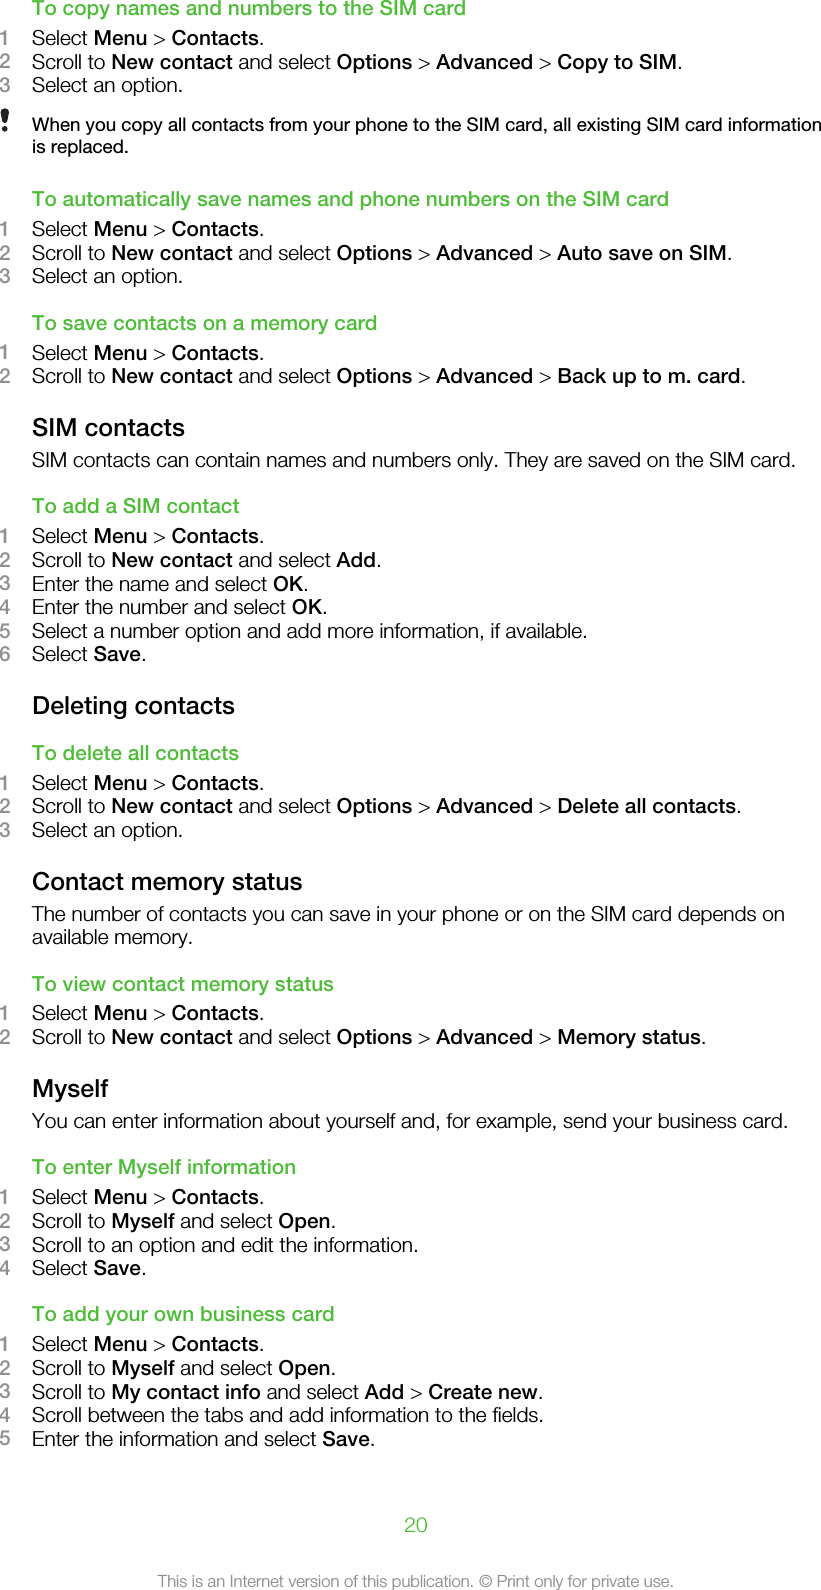 To copy names and numbers to the SIM card1Select Menu &gt; Contacts.2Scroll to New contact and select Options &gt; Advanced &gt; Copy to SIM.3Select an option.When you copy all contacts from your phone to the SIM card, all existing SIM card informationis replaced.To automatically save names and phone numbers on the SIM card1Select Menu &gt; Contacts.2Scroll to New contact and select Options &gt; Advanced &gt; Auto save on SIM.3Select an option.To save contacts on a memory card1Select Menu &gt; Contacts.2Scroll to New contact and select Options &gt; Advanced &gt; Back up to m. card.SIM contactsSIM contacts can contain names and numbers only. They are saved on the SIM card.To add a SIM contact1Select Menu &gt; Contacts.2Scroll to New contact and select Add.3Enter the name and select OK.4Enter the number and select OK.5Select a number option and add more information, if available.6Select Save.Deleting contactsTo delete all contacts1Select Menu &gt; Contacts.2Scroll to New contact and select Options &gt; Advanced &gt; Delete all contacts.3Select an option.Contact memory statusThe number of contacts you can save in your phone or on the SIM card depends onavailable memory.To view contact memory status1Select Menu &gt; Contacts.2Scroll to New contact and select Options &gt; Advanced &gt; Memory status.MyselfYou can enter information about yourself and, for example, send your business card.To enter Myself information1Select Menu &gt; Contacts.2Scroll to Myself and select Open.3Scroll to an option and edit the information.4Select Save.To add your own business card1Select Menu &gt; Contacts.2Scroll to Myself and select Open.3Scroll to My contact info and select Add &gt; Create new.4Scroll between the tabs and add information to the fields.5Enter the information and select Save.20This is an Internet version of this publication. © Print only for private use.